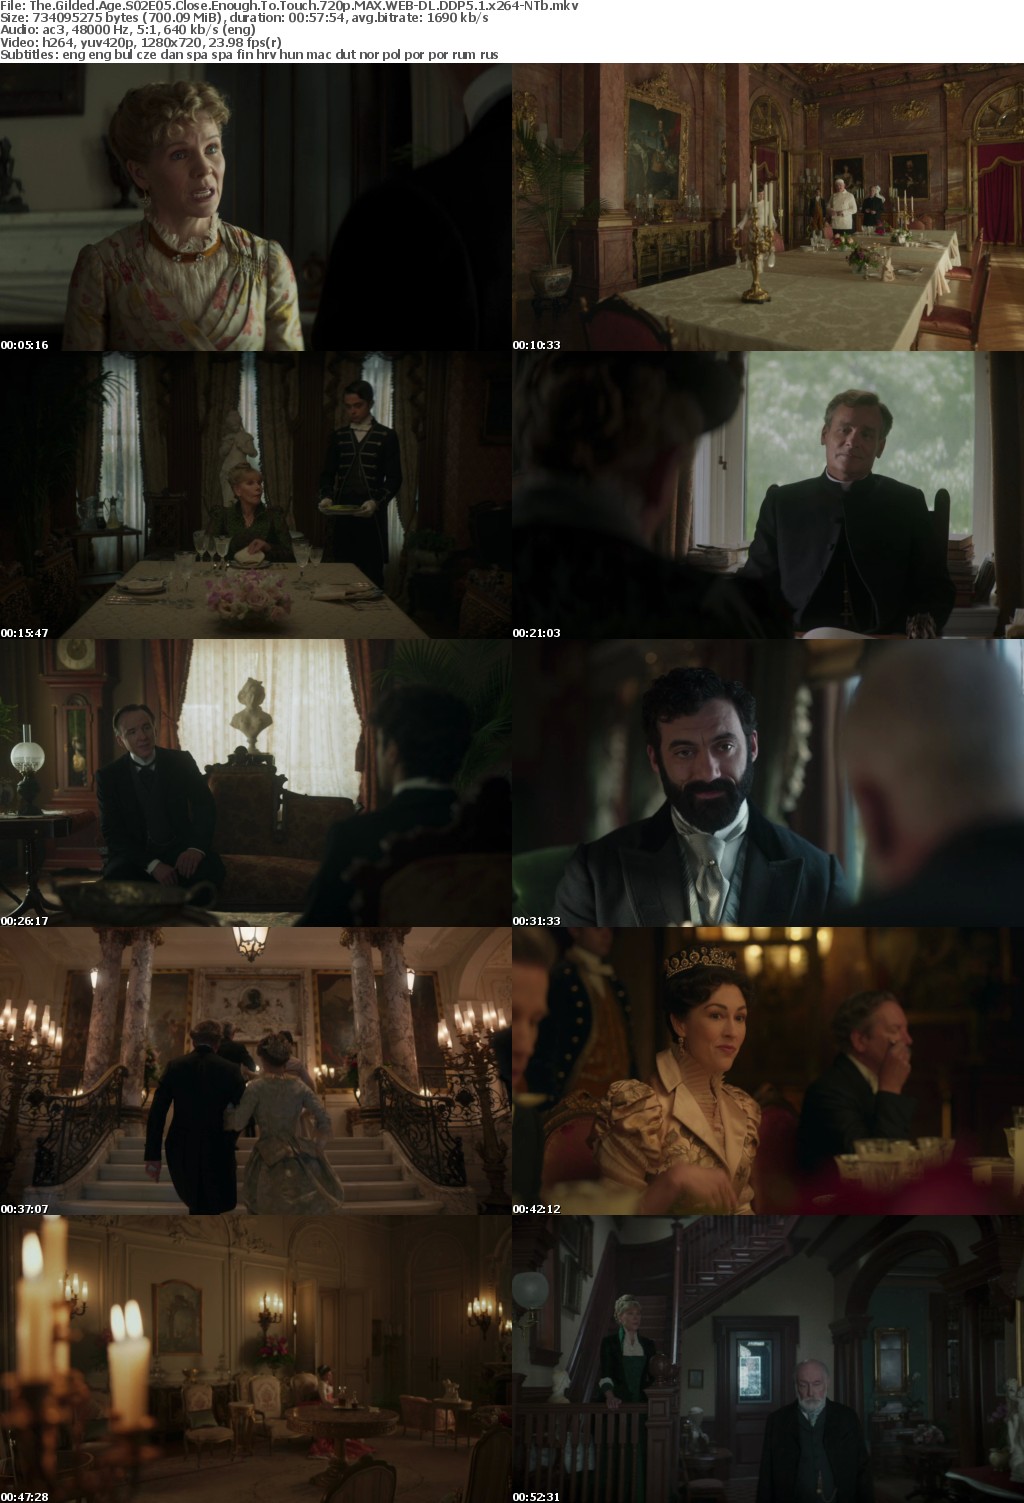 The Gilded Age S02E05 Close Enough To Touch 720p MAX WEB-DL DDP5 1 x264-NTb